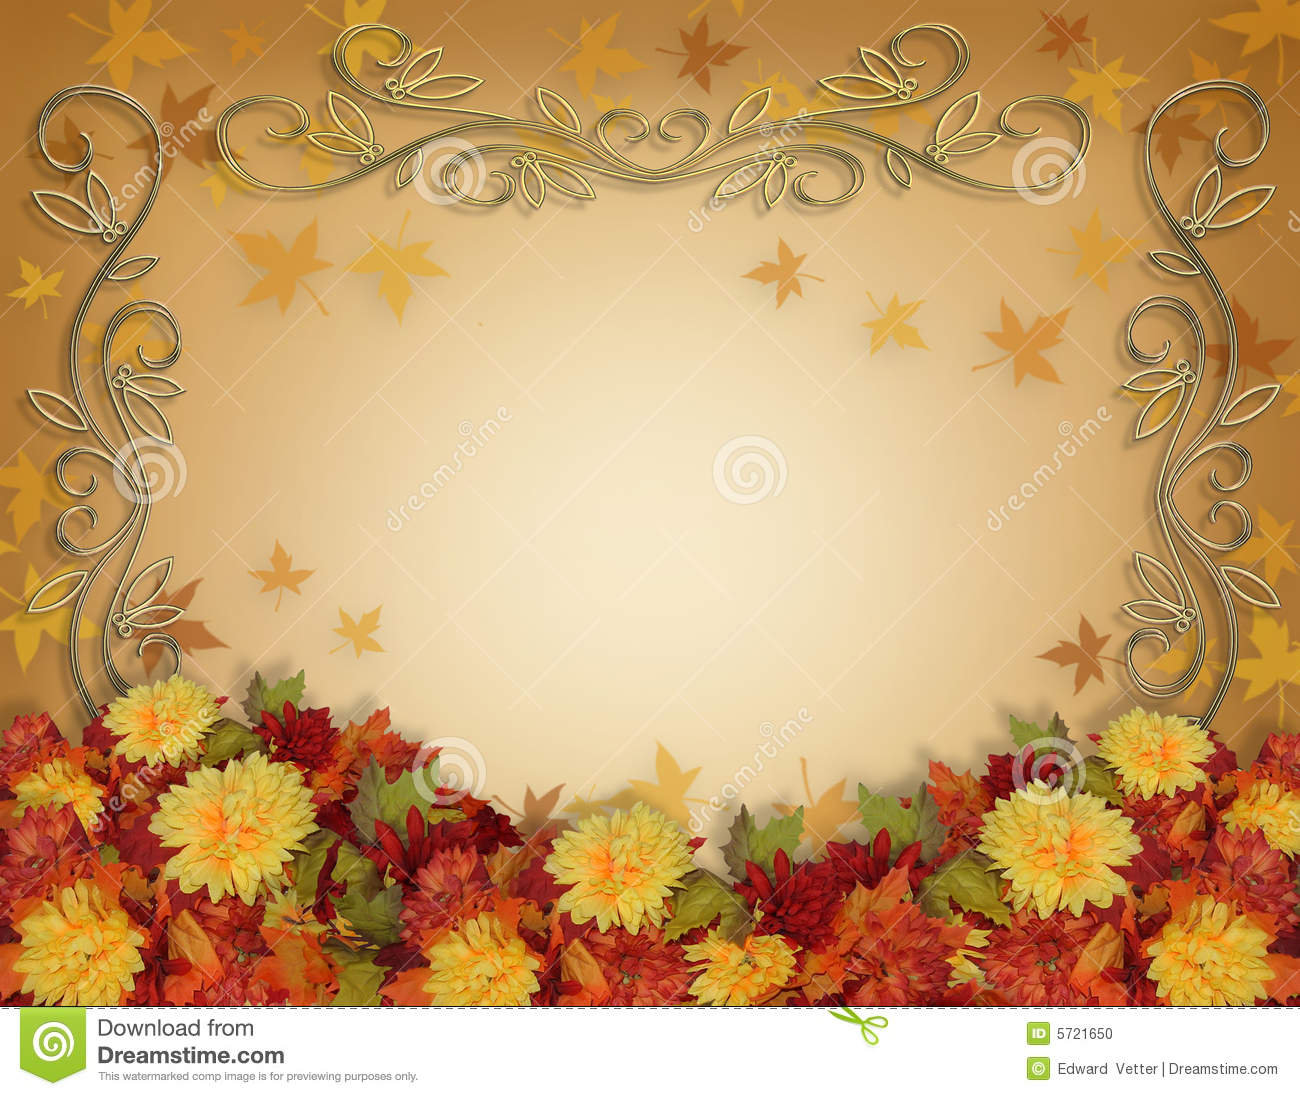 Thanksgiving Fall Leaves And Flowers Border Design Stock Photo   Image